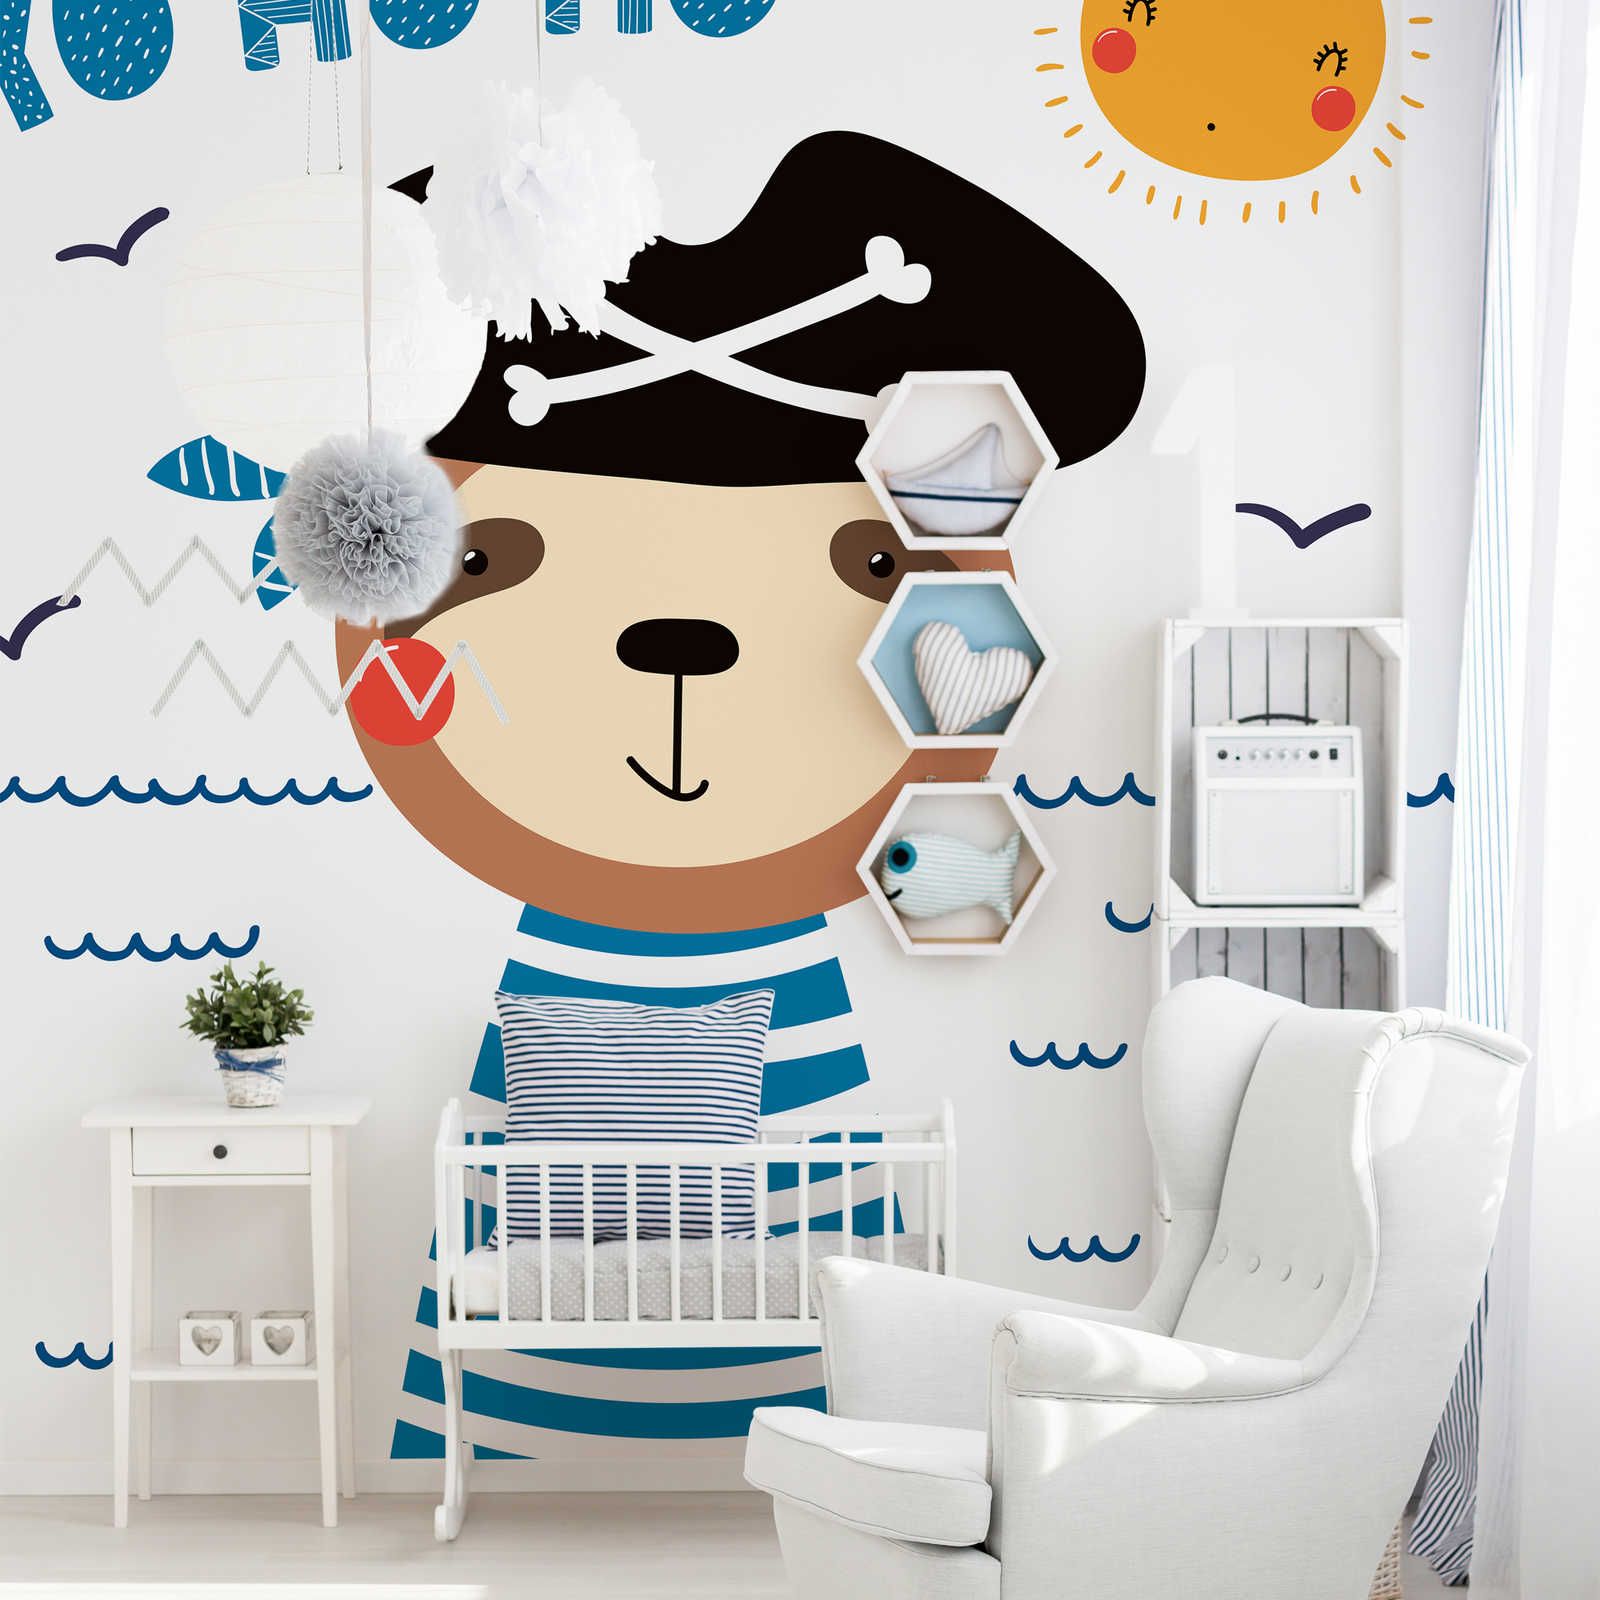 Nursery mural with bear pirate - textured non-woven
